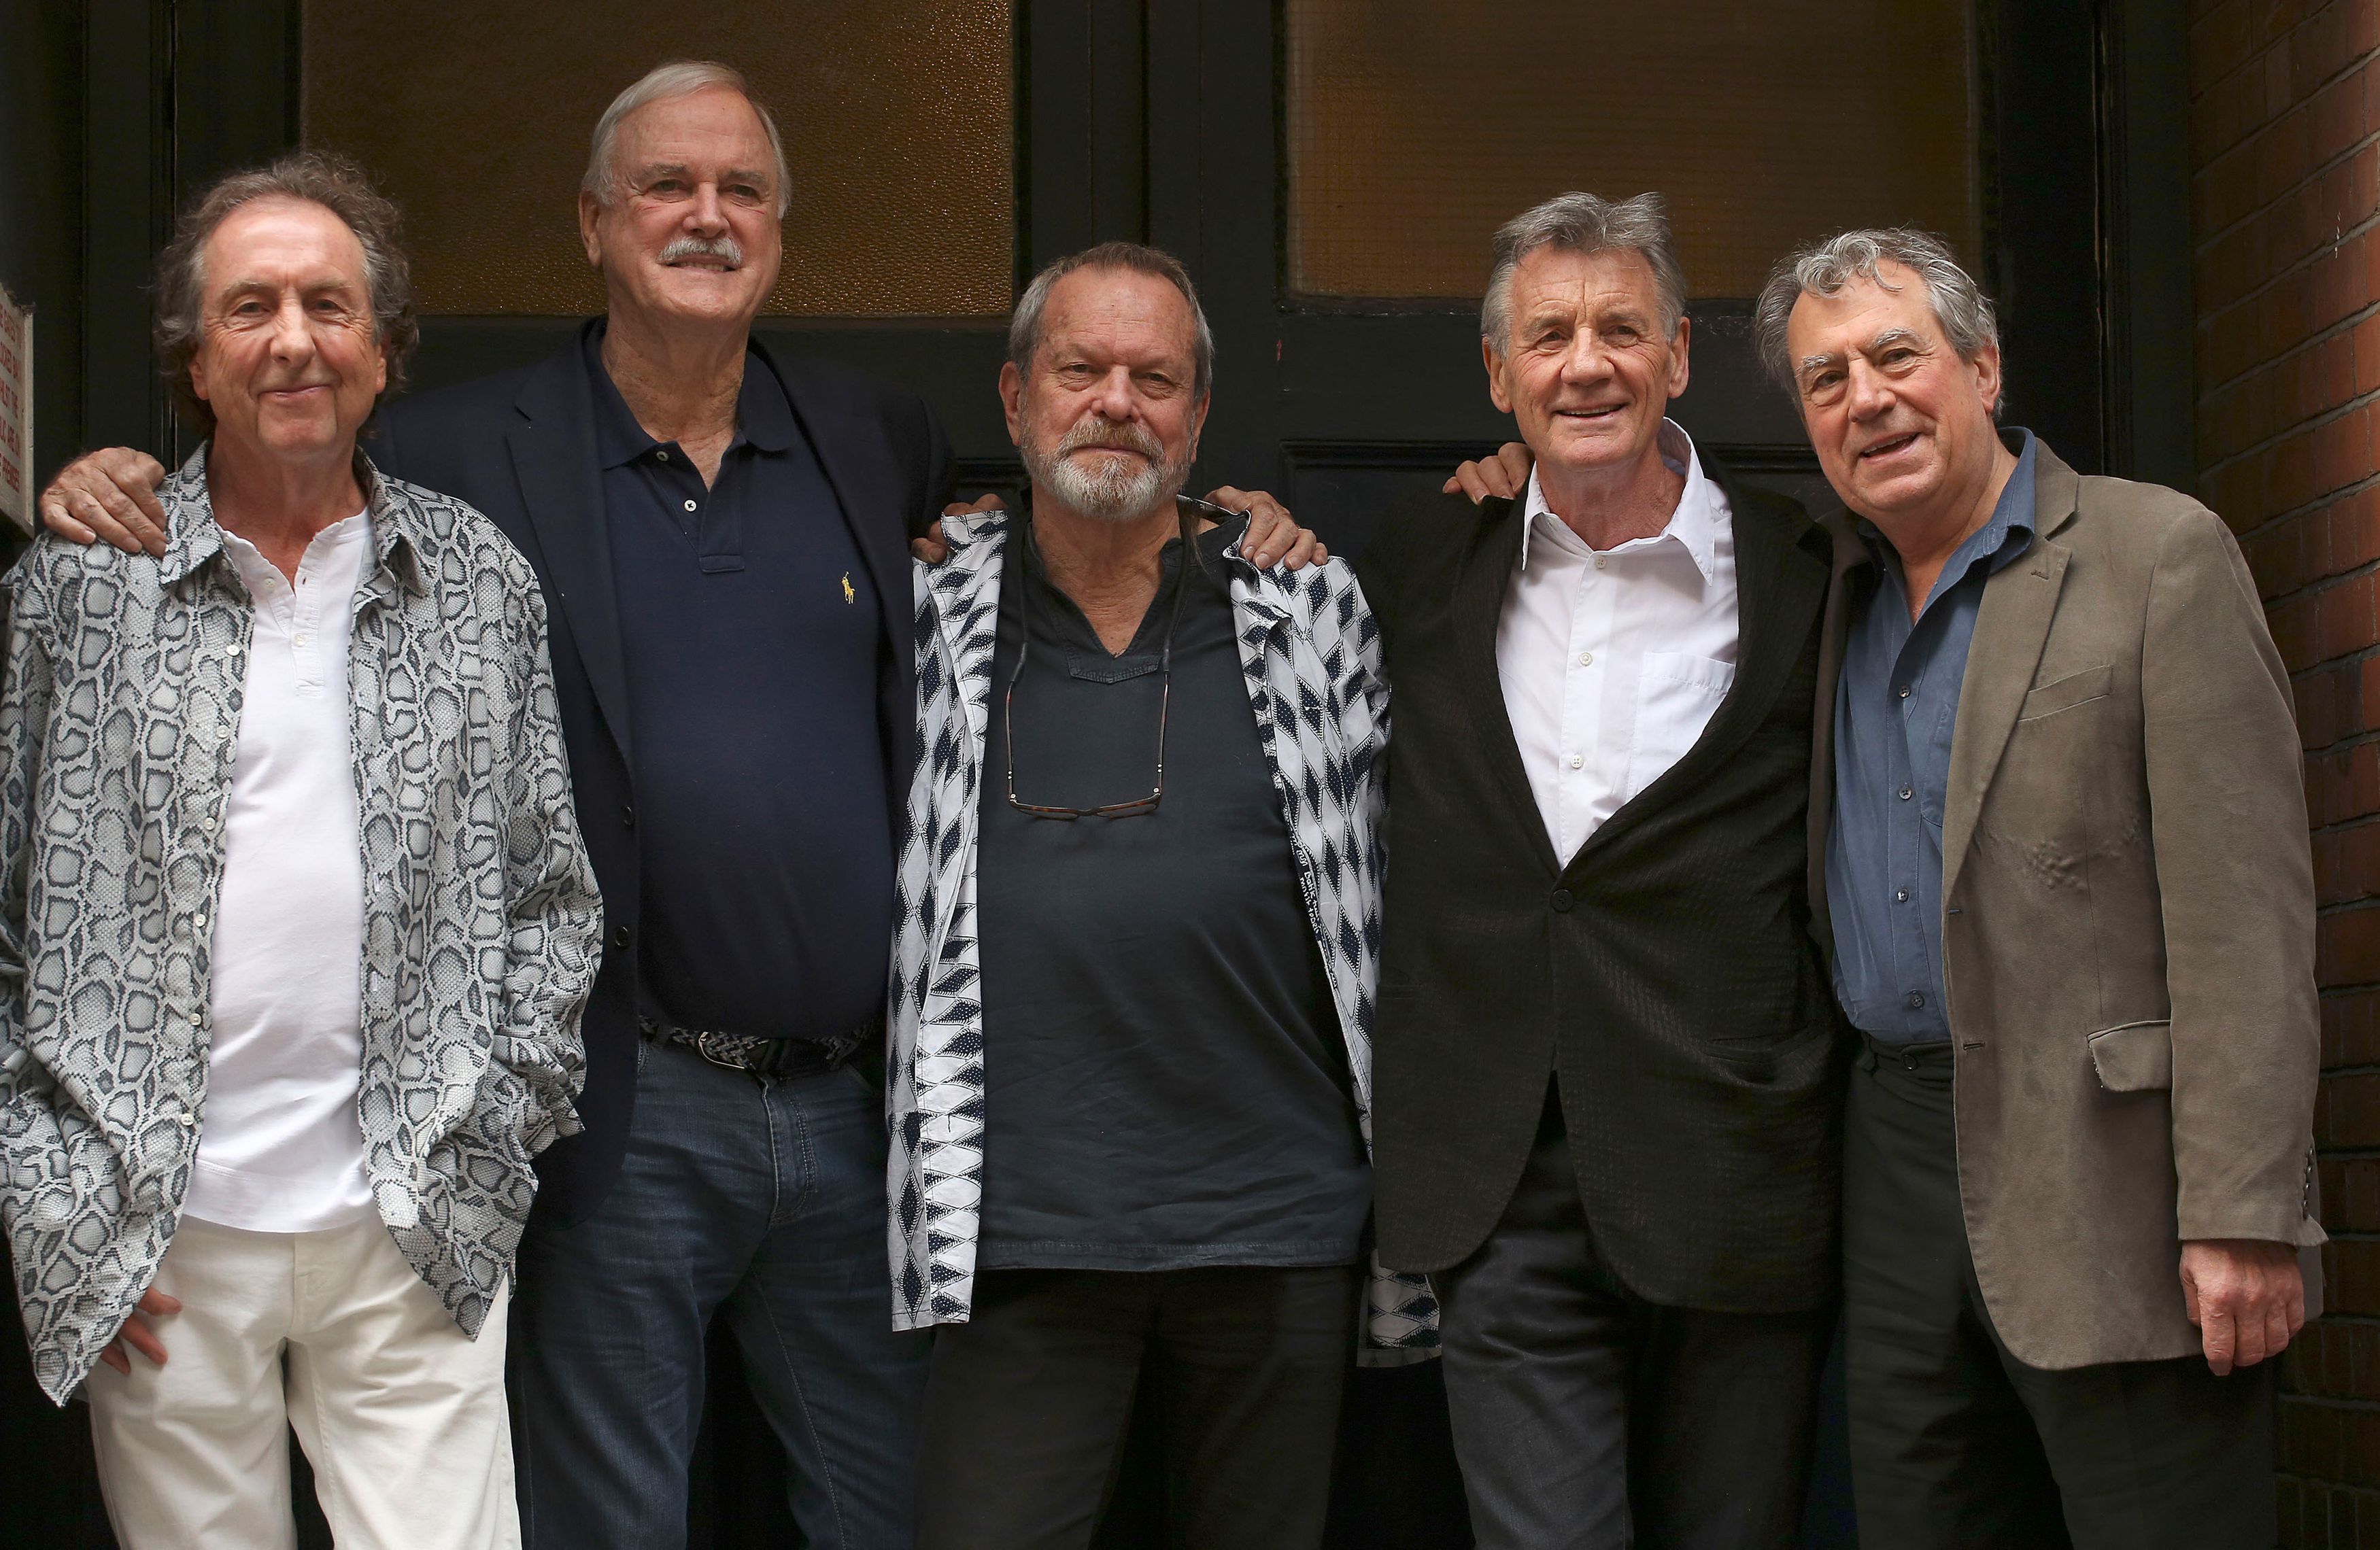 No 50th reunion planned for Monty Python (Philip Toscano/PA)